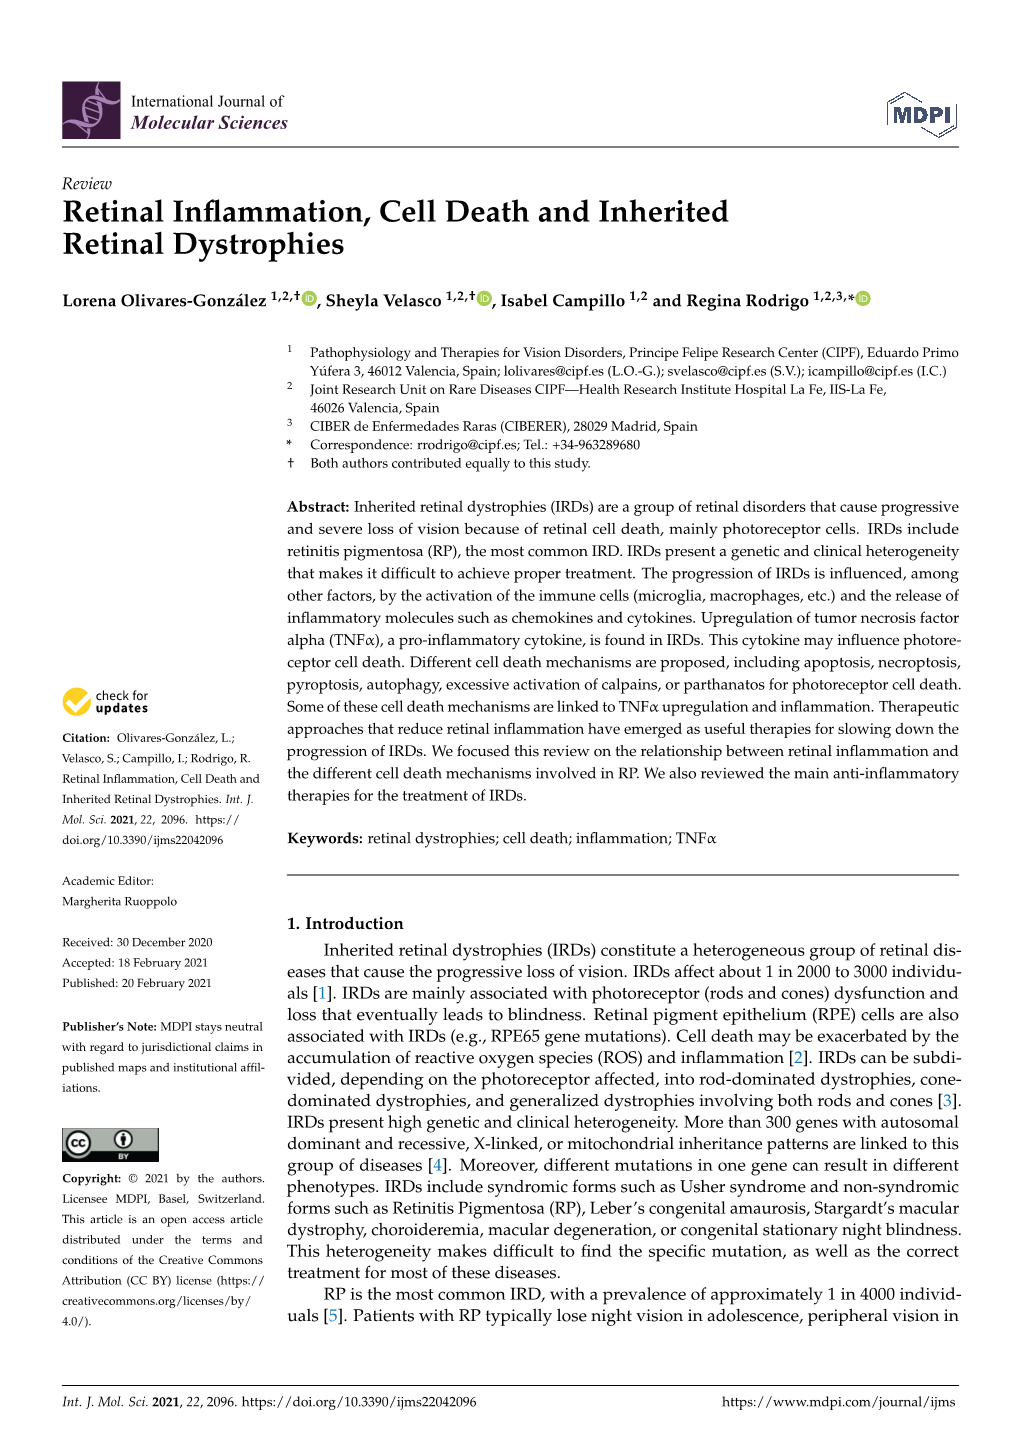 Retinal Inflammation, Cell Death and Inherited Retinal Dystrophies